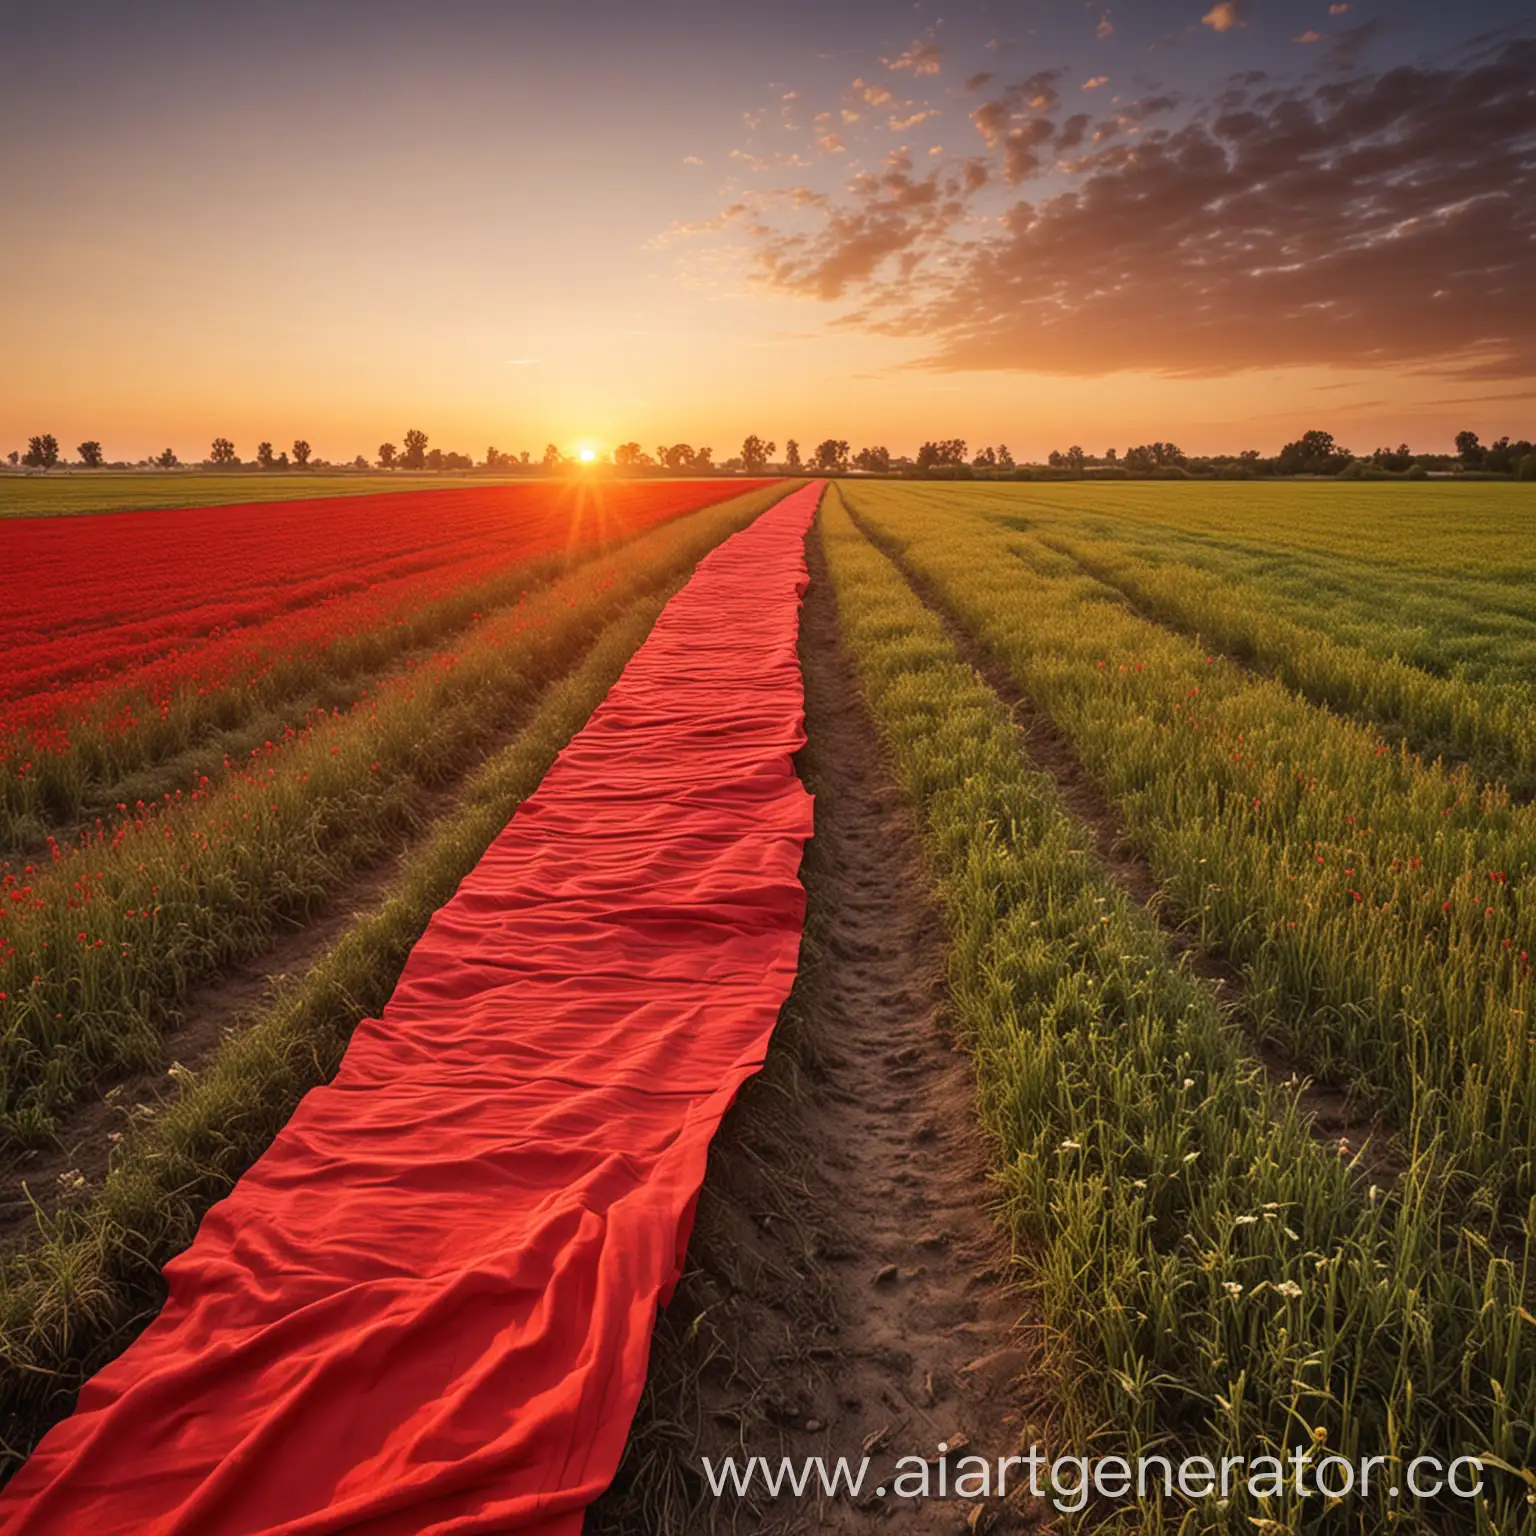 Sunrise-Over-Red-Fabric-Pathway-in-Field